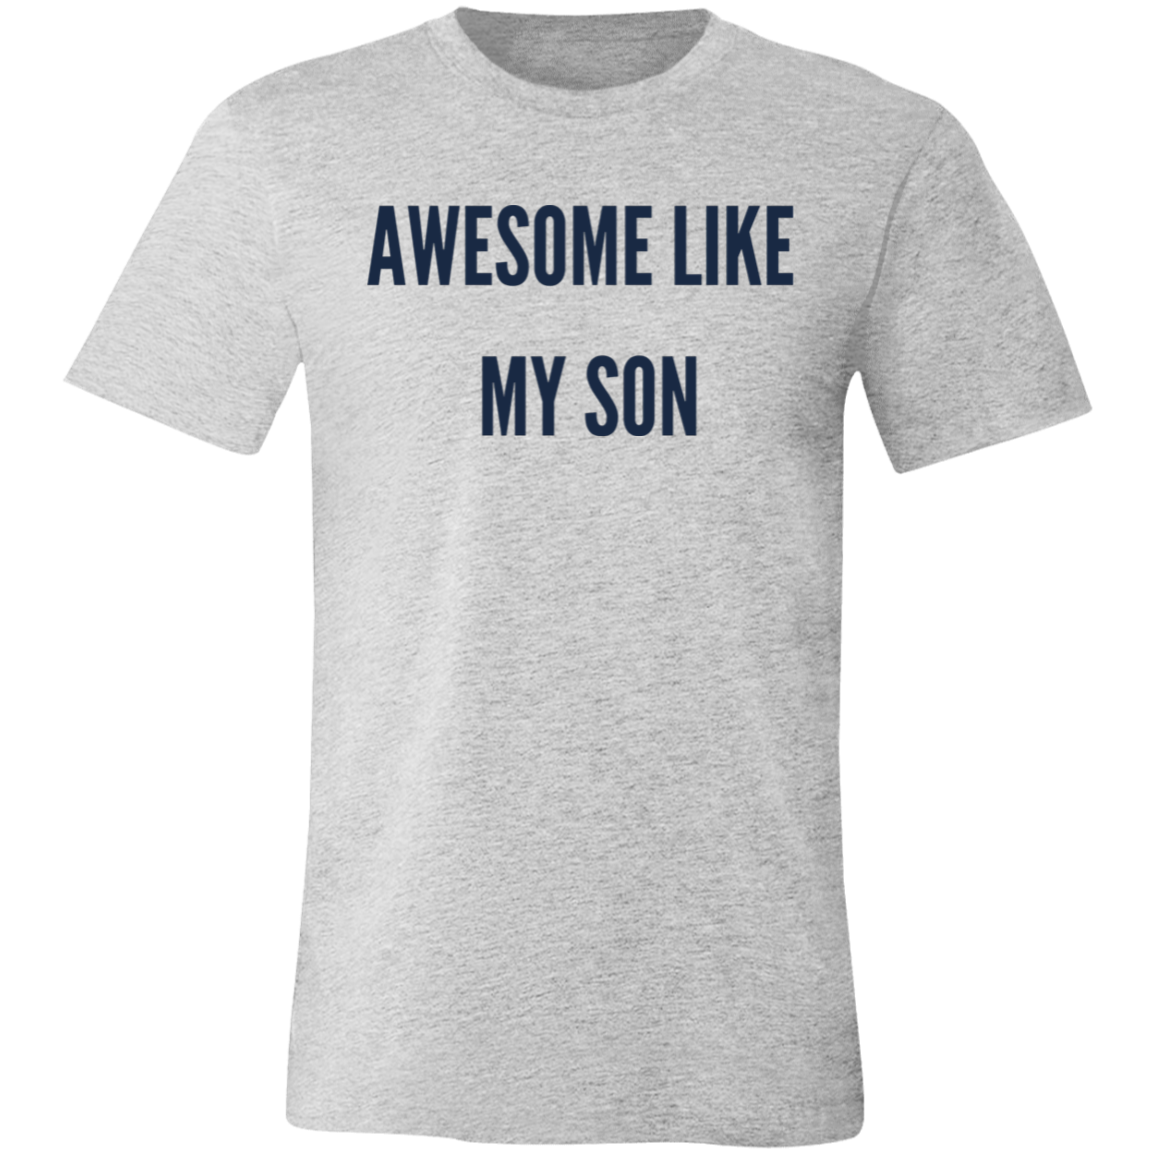 Aweso like My Son on Unisex Jersey Short-Sleeve T-Shirt